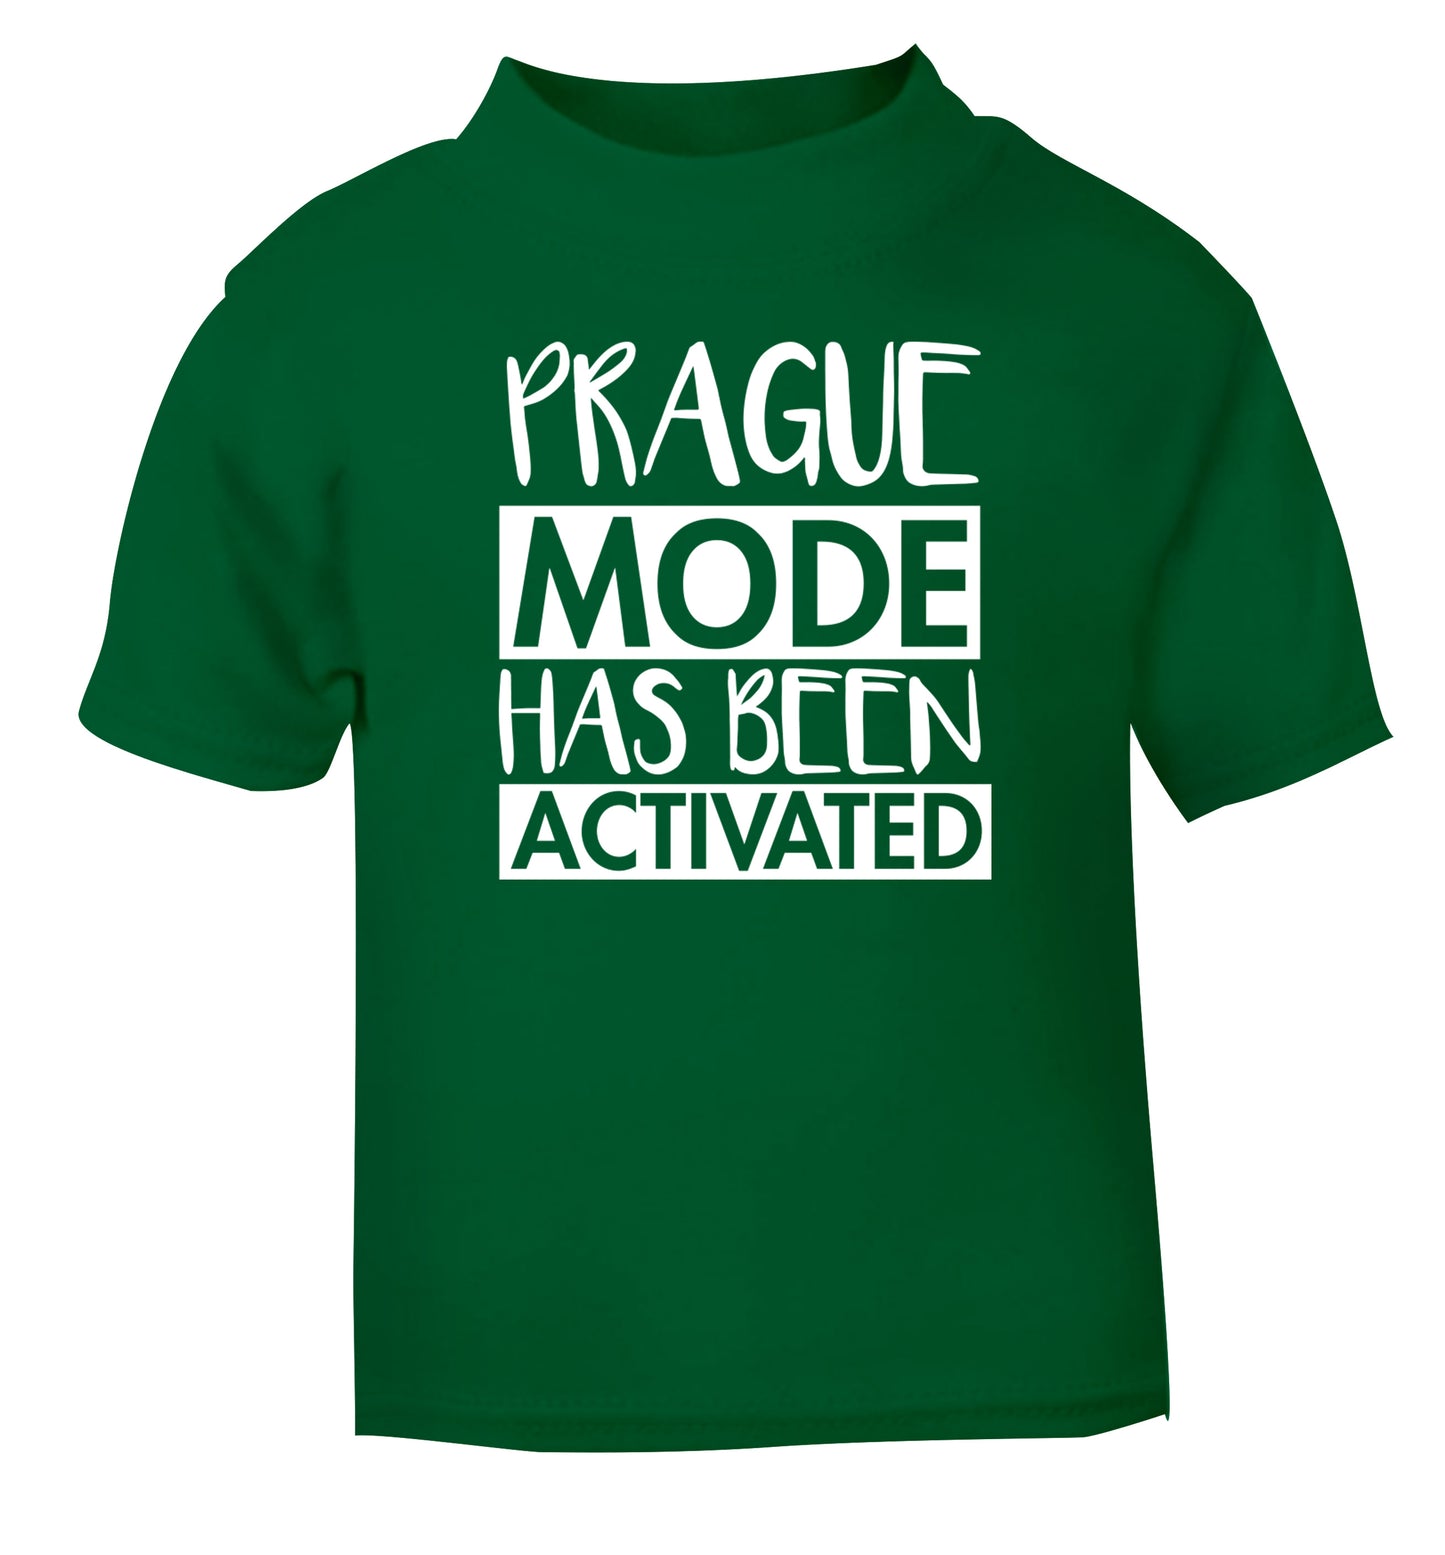 Prague mode has been activated green Baby Toddler Tshirt 2 Years